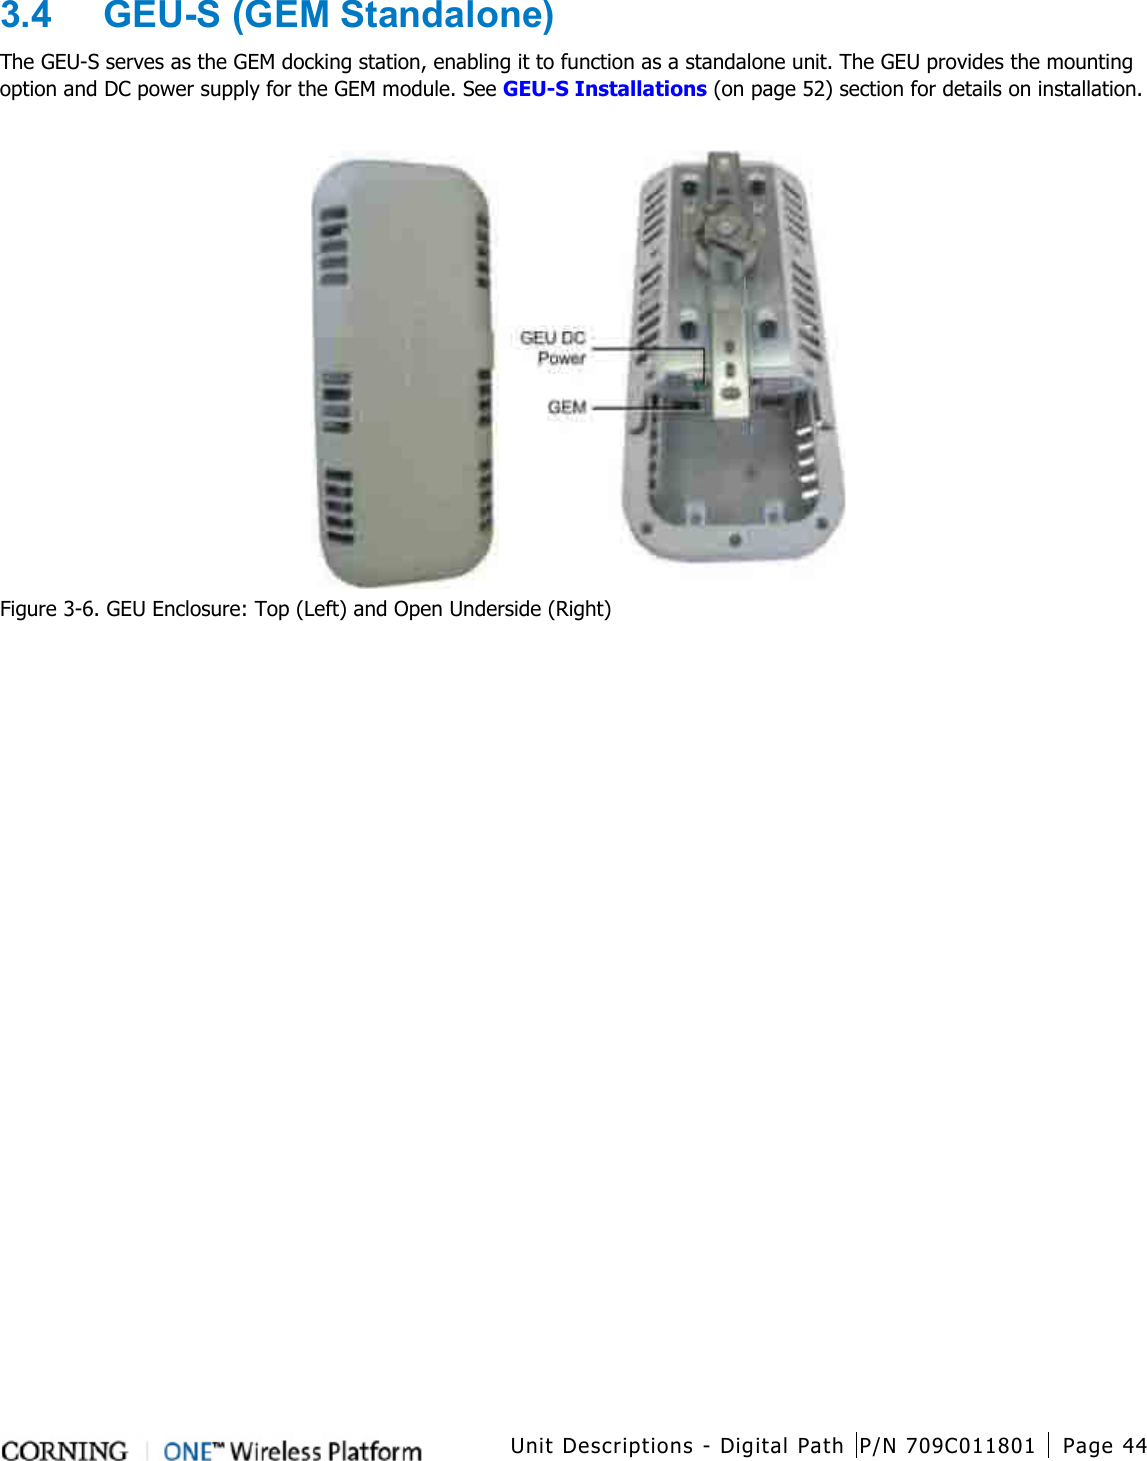  Unit Descriptions - Digital Path P/N 709C011801 Page 44   3.4  GEU-S (GEM Standalone) The GEU-S serves as the GEM docking station, enabling it to function as a standalone unit. The GEU provides the mounting option and DC power supply for the GEM module. See GEU-S Installations (on page 52) section for details on installation.   Figure  3-6. GEU Enclosure: Top (Left) and Open Underside (Right)  